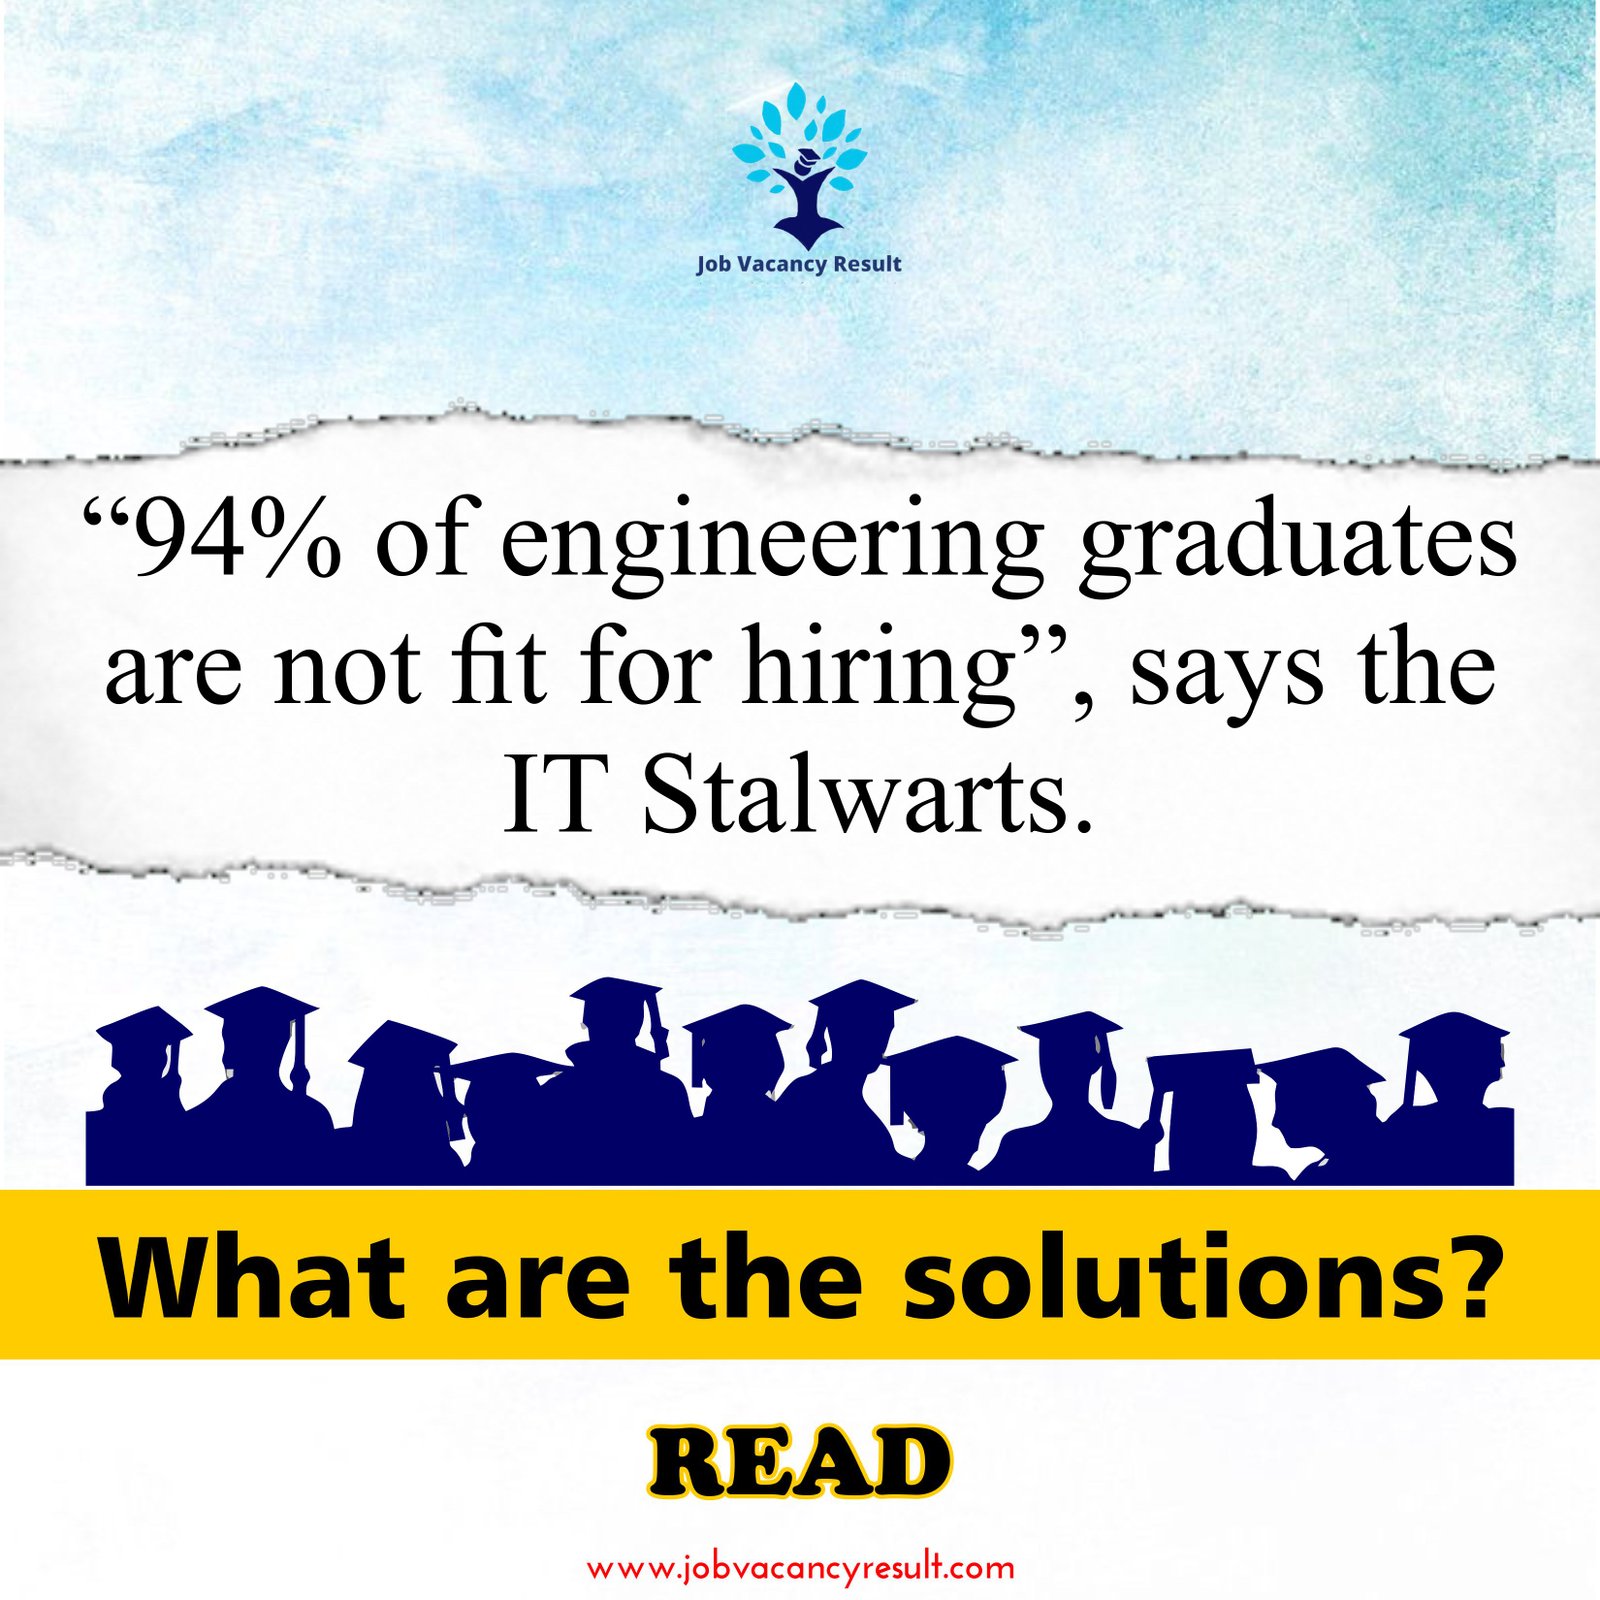 94% of engineering graduates are not fit for hiring - say this IT stalwart.What are the solutions?